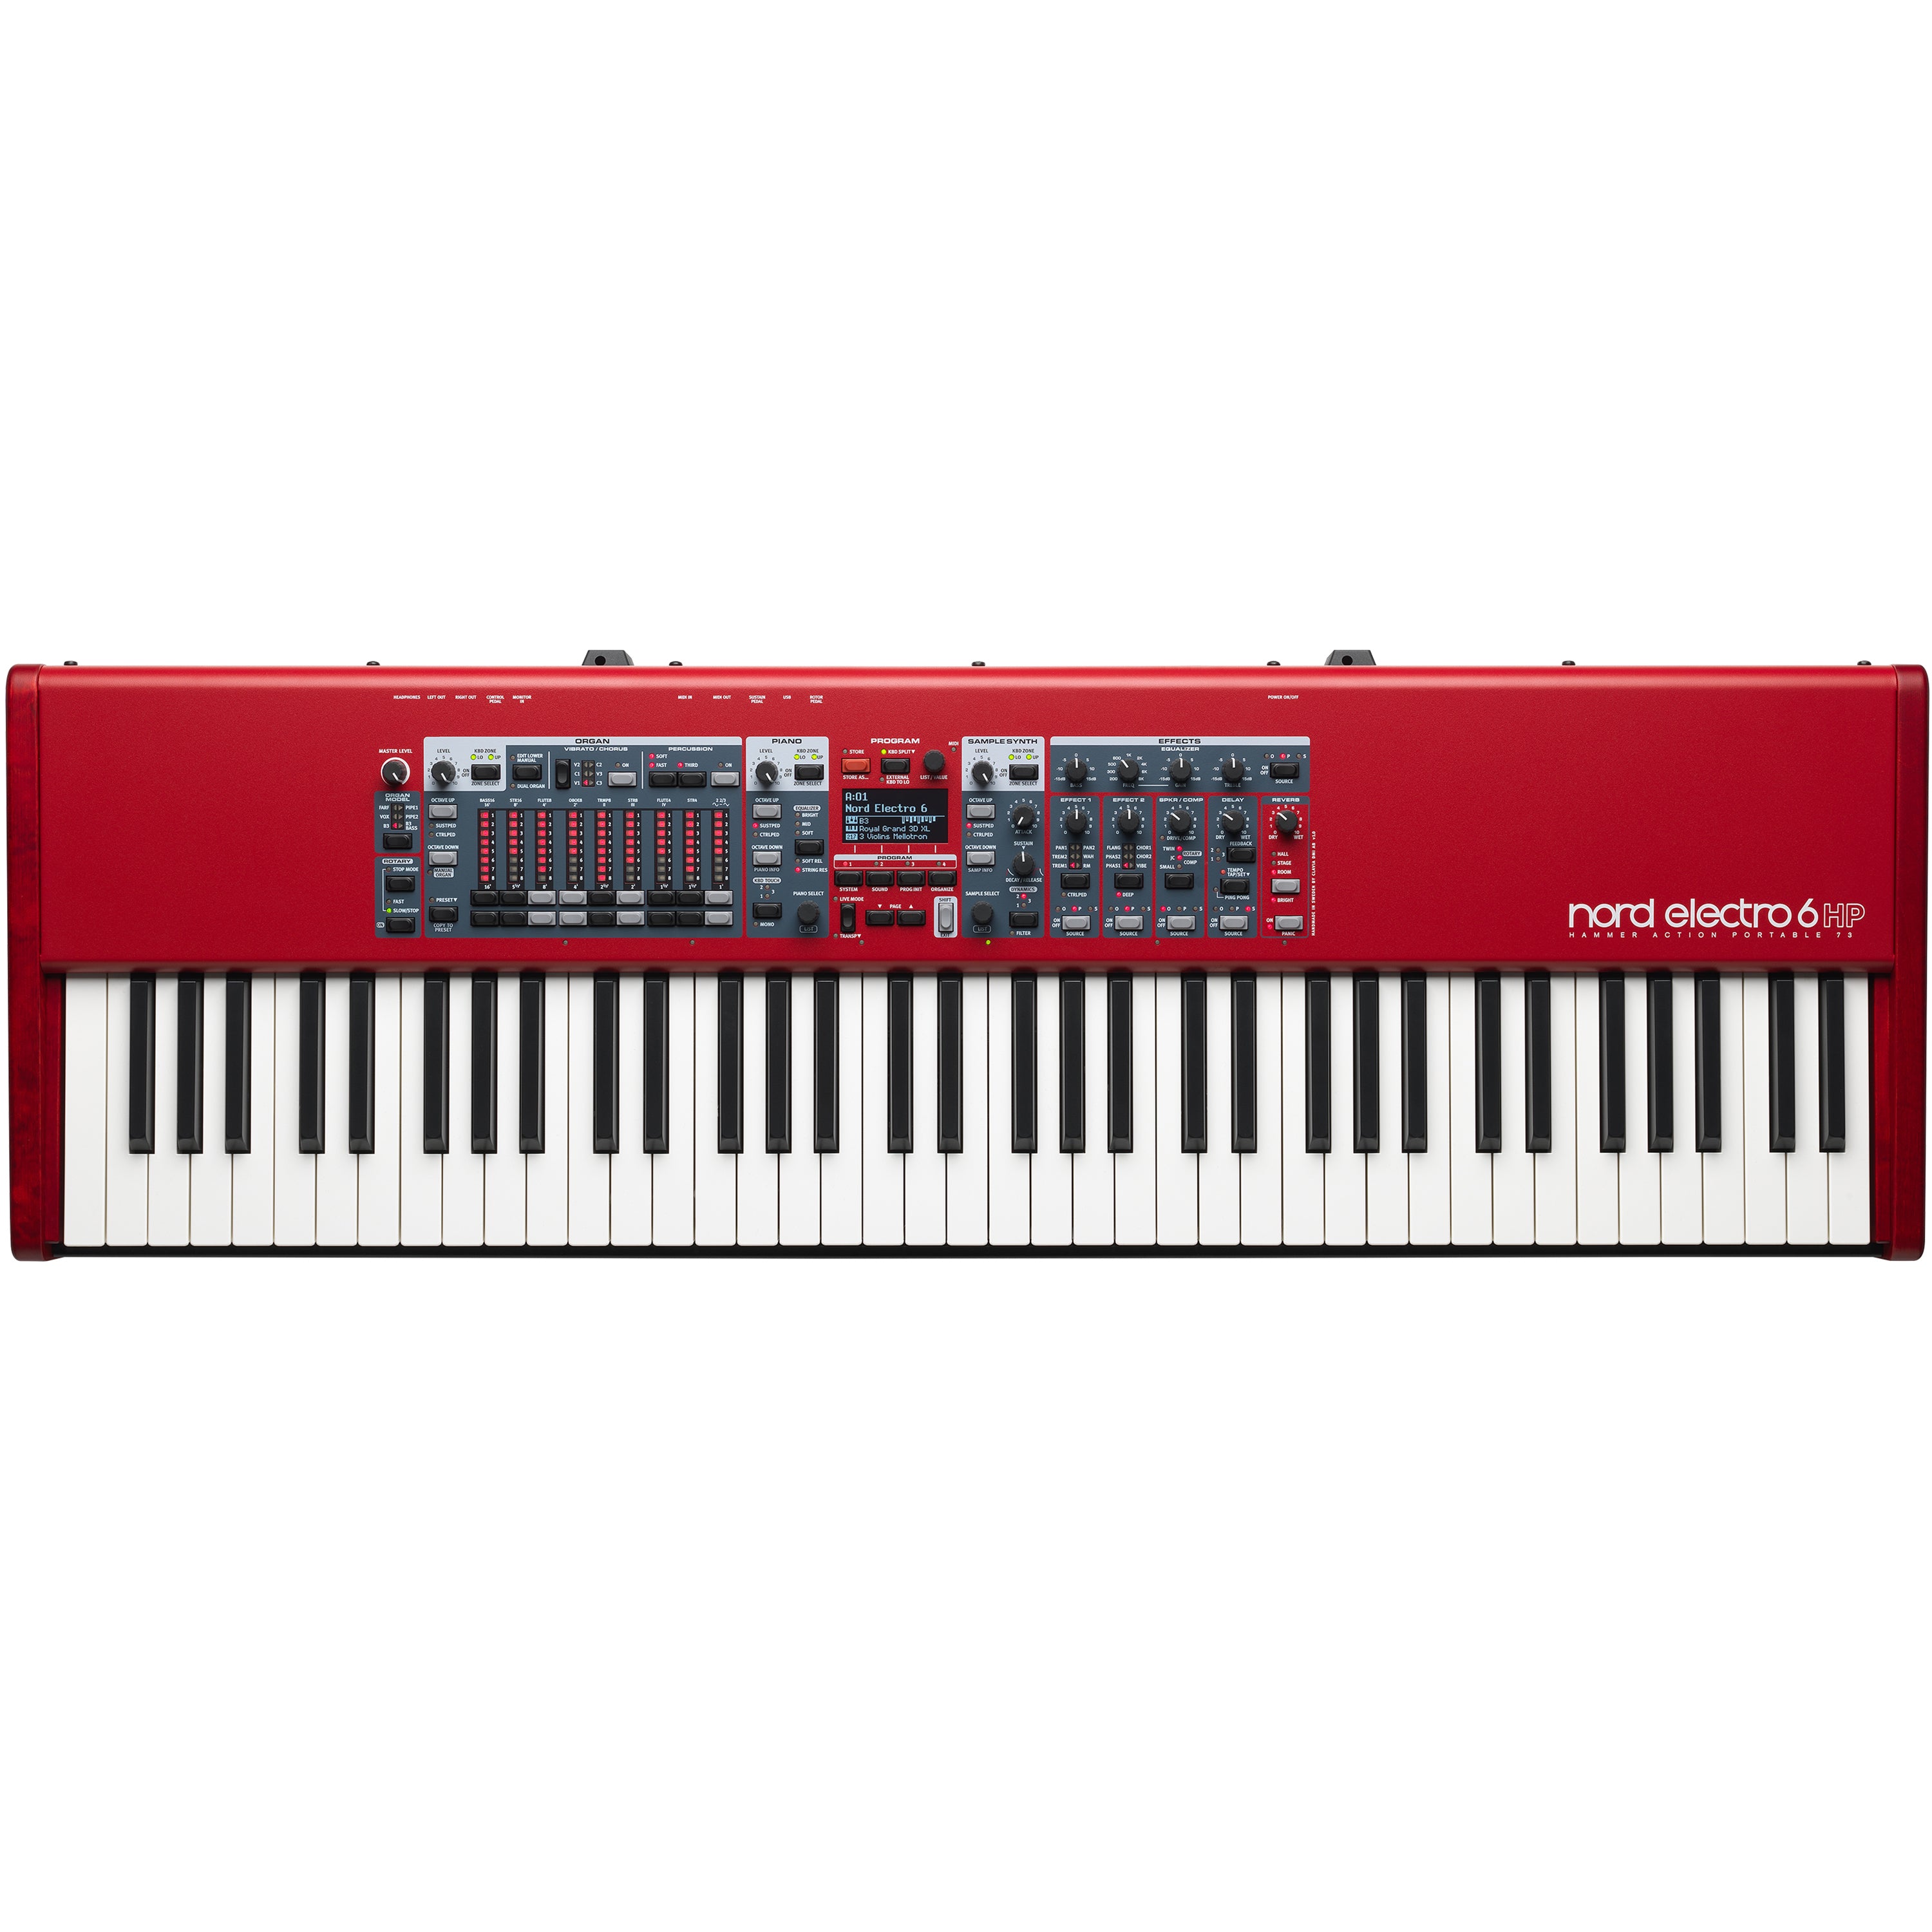 Nord Electro 6 HP 73 Stage Keyboard